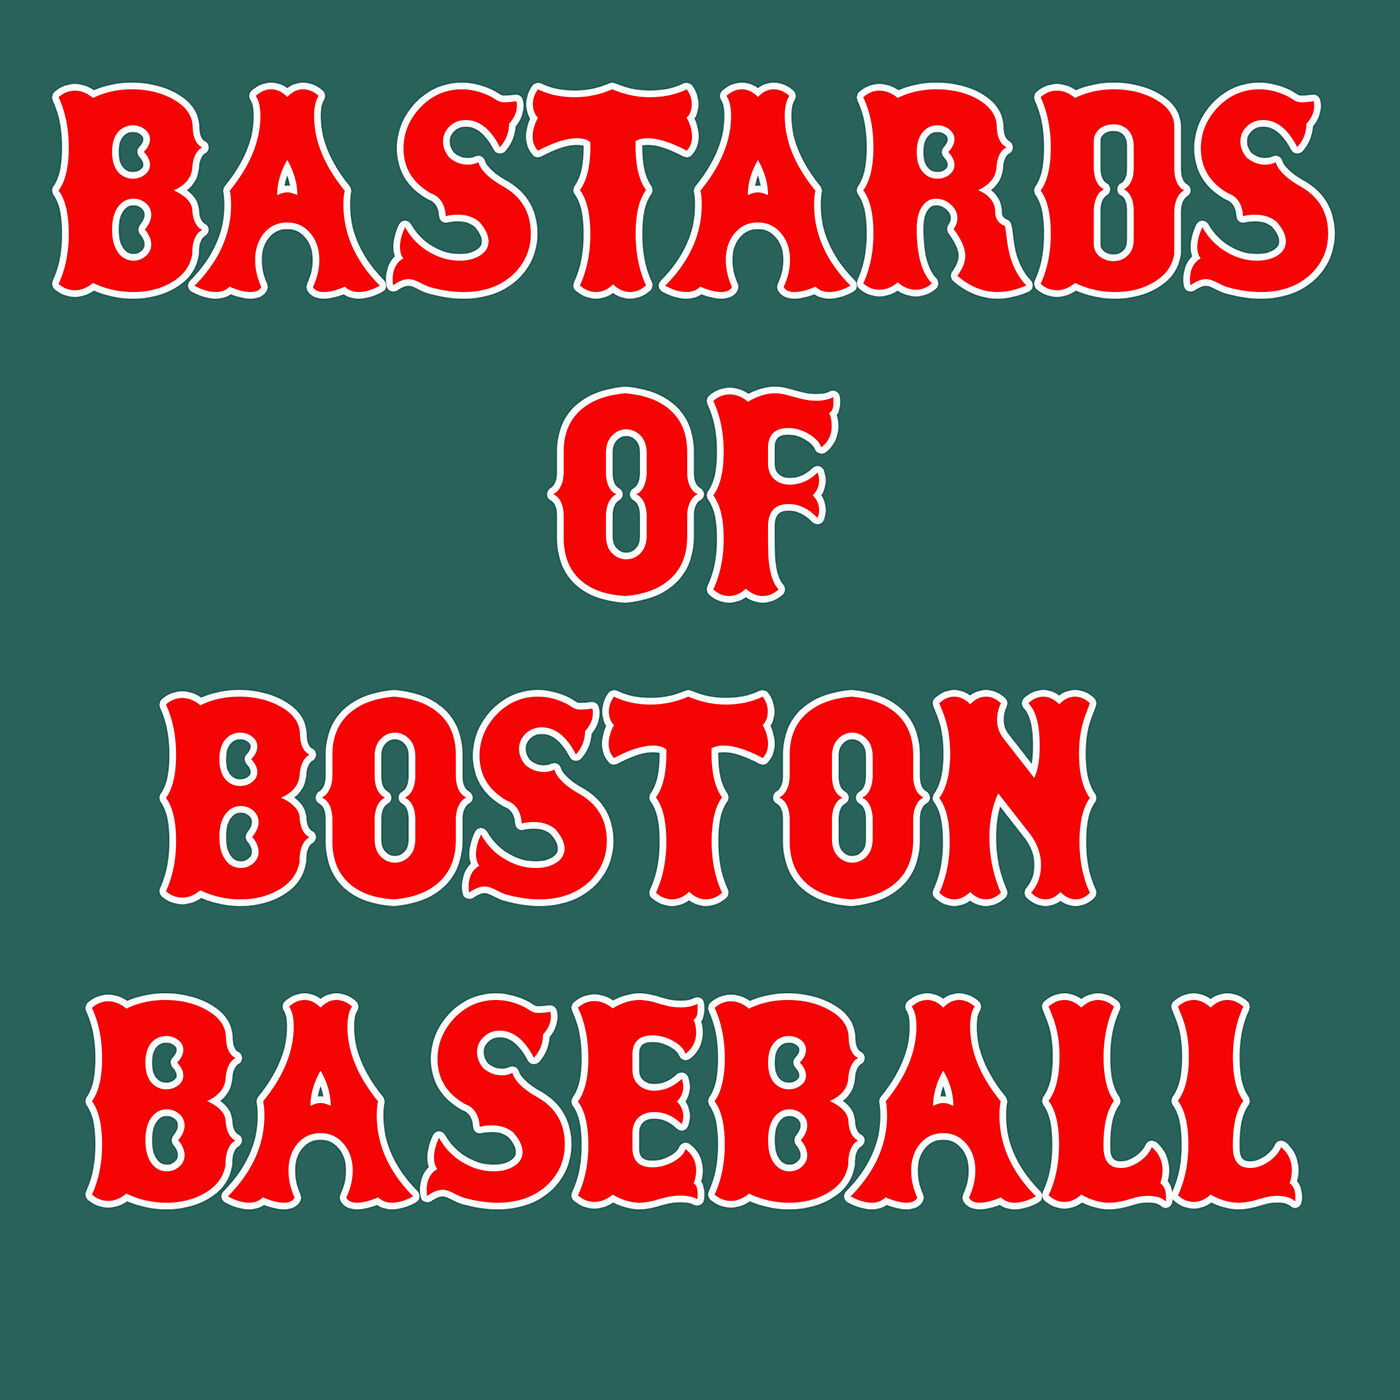 State Of The Red Sox Playoff Race!